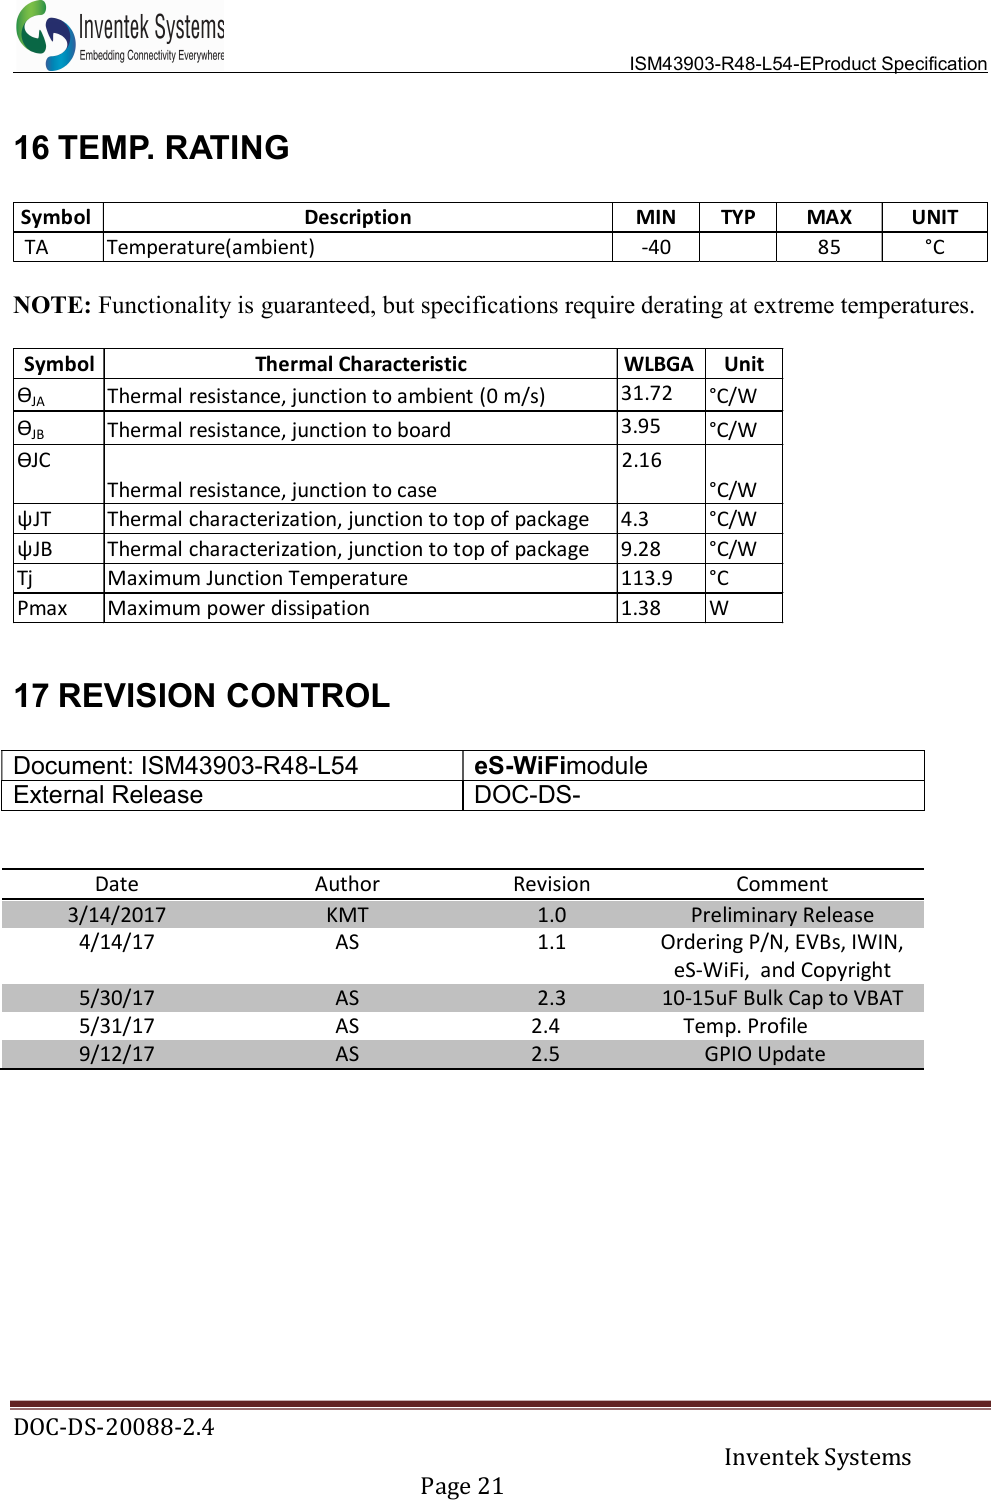   ISM43903-R48-L54-EProduct Specification DOC-DS-20088-2.4     Inventek Systems   Page 21  16 TEMP. RATING    NOTE: Functionality is guaranteed, but specifications require derating at extreme temperatures.    17 REVISION CONTROL  Document: ISM43903-R48-L54 eS-WiFimodule External Release  DOC-DS-   Date Author Revision Comment 3/14/2017 KMT 1.0 Preliminary Release 4/14/17 AS 1.1 Ordering P/N, EVBs, IWIN, eS-WiFi,  and Copyright 5/30/17                         AS 2.3 10-15uF Bulk Cap to VBAT 5/31/17                     AS            2.4       Temp. Profile 9/12/17 AS            2.5             GPIO Update          Symbol  Description MIN TYP MAX UNITTA         Temperature(ambient)                  -40 85 °CSymbol  Thermal Characteristic WLBGA  UnitƟJA   Thermal resistance, junction to ambient (0 m/s)                 31.72                   °C/WƟJB  Thermal resistance, junction to board                                   3.95                     °C/WƟJC Thermal resistance, junction to case                                      2.16                      °C/WψJTThermal characterization, junction to top of package       4.3 °C/WψJB   Thermal characterization, junction to top of package       9.28 °C/WTj                           Maximum Junction Temperature                                             113.9 °CPmax    Maximum power dissipation                                                     1.38 W